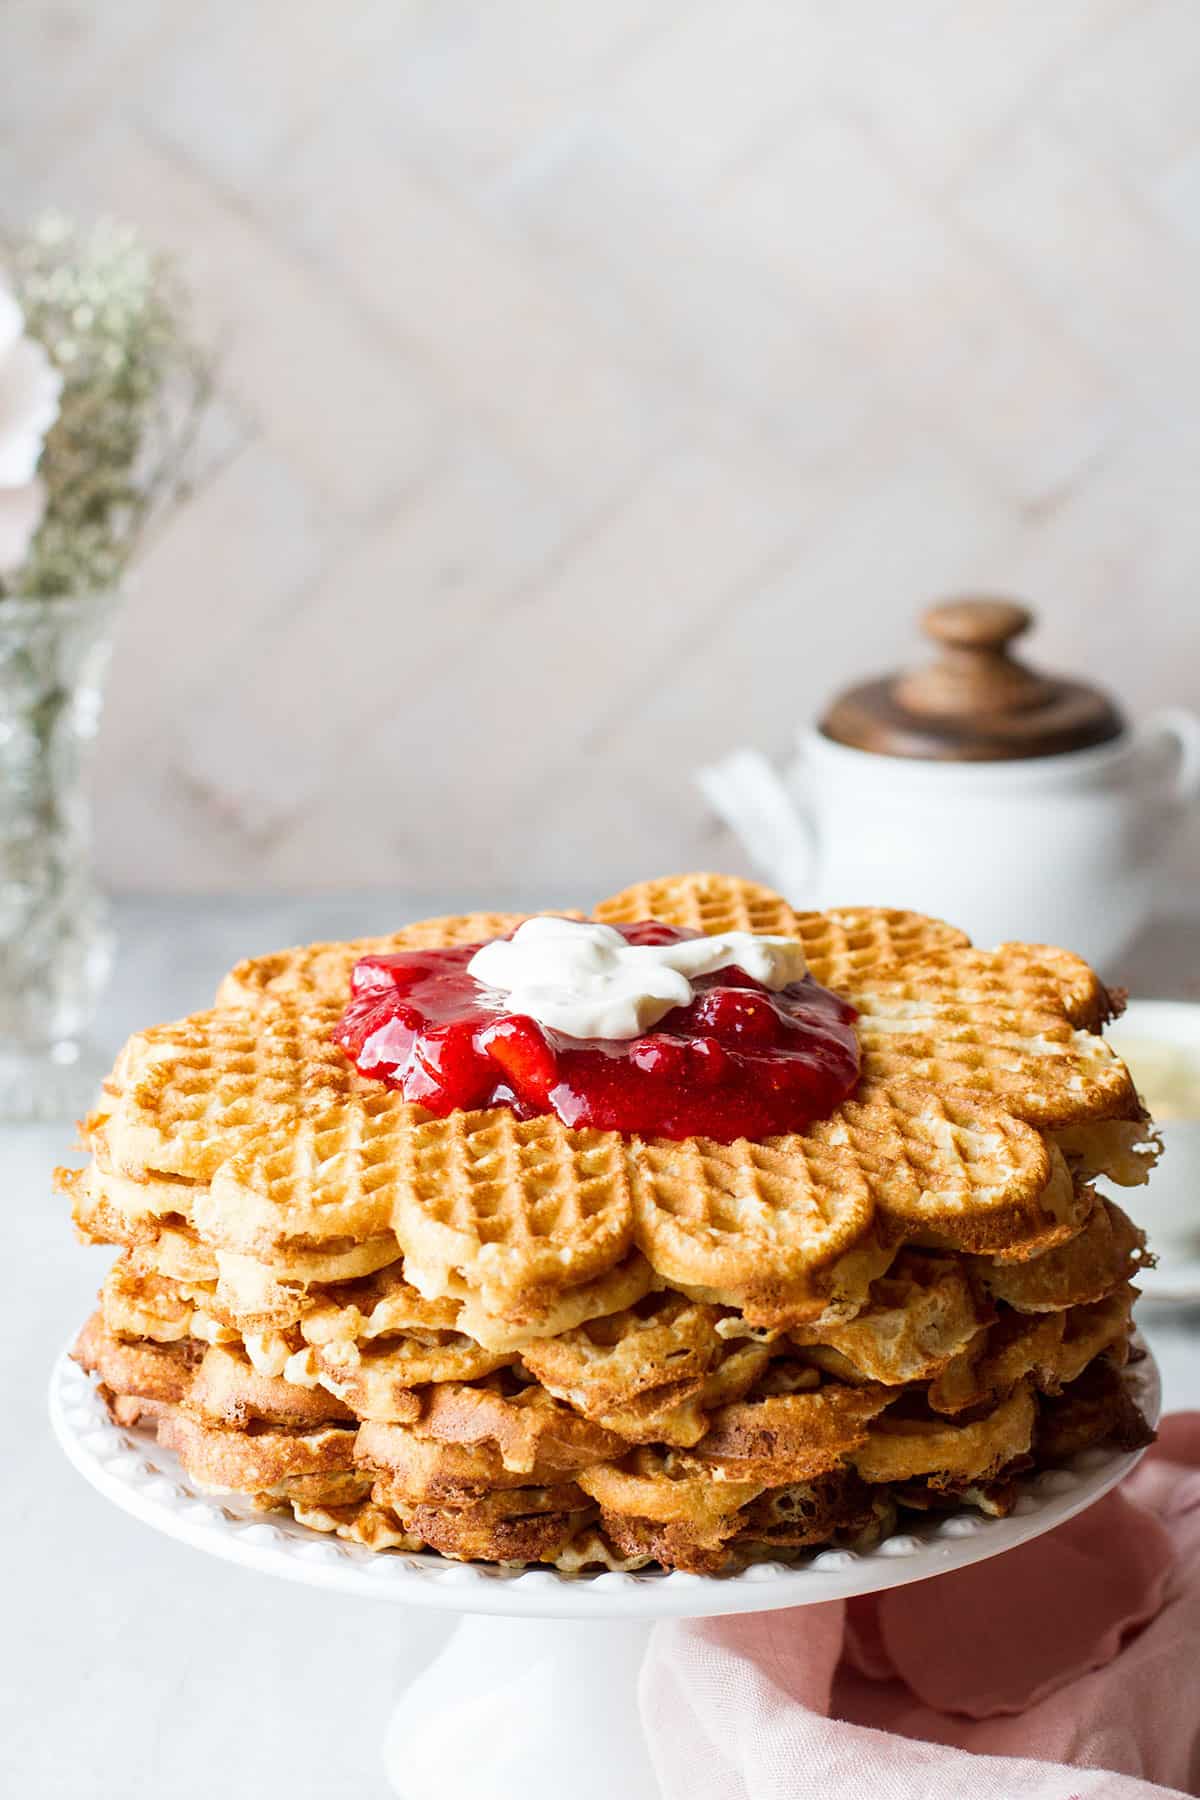 Tall stack of waffles on a cake stand.